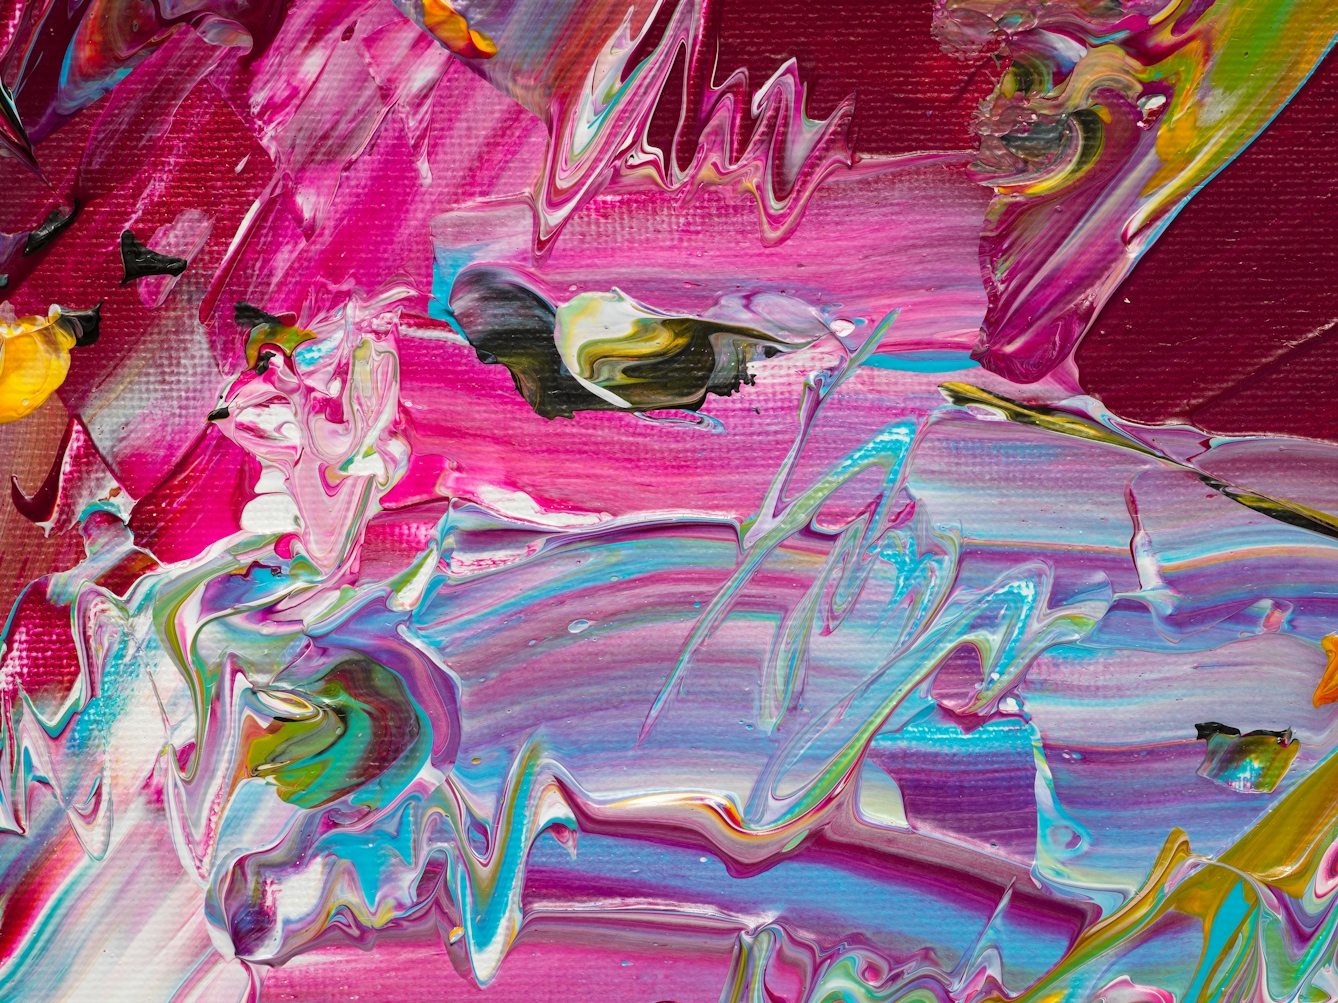 Photograph of close-up detail of a larger abstract  expressionist painting  utilising acrylic paint on a rectangular canvas in landscape orientation. A vast majority of the canvas surface contains many scattered, complex and confusing marks and gestures of vibrant and colourful tones - including yellow, pink, orange, turquoise, white. It's akin to a frenetic and overwhelming scene of repeated surprises and shocks.